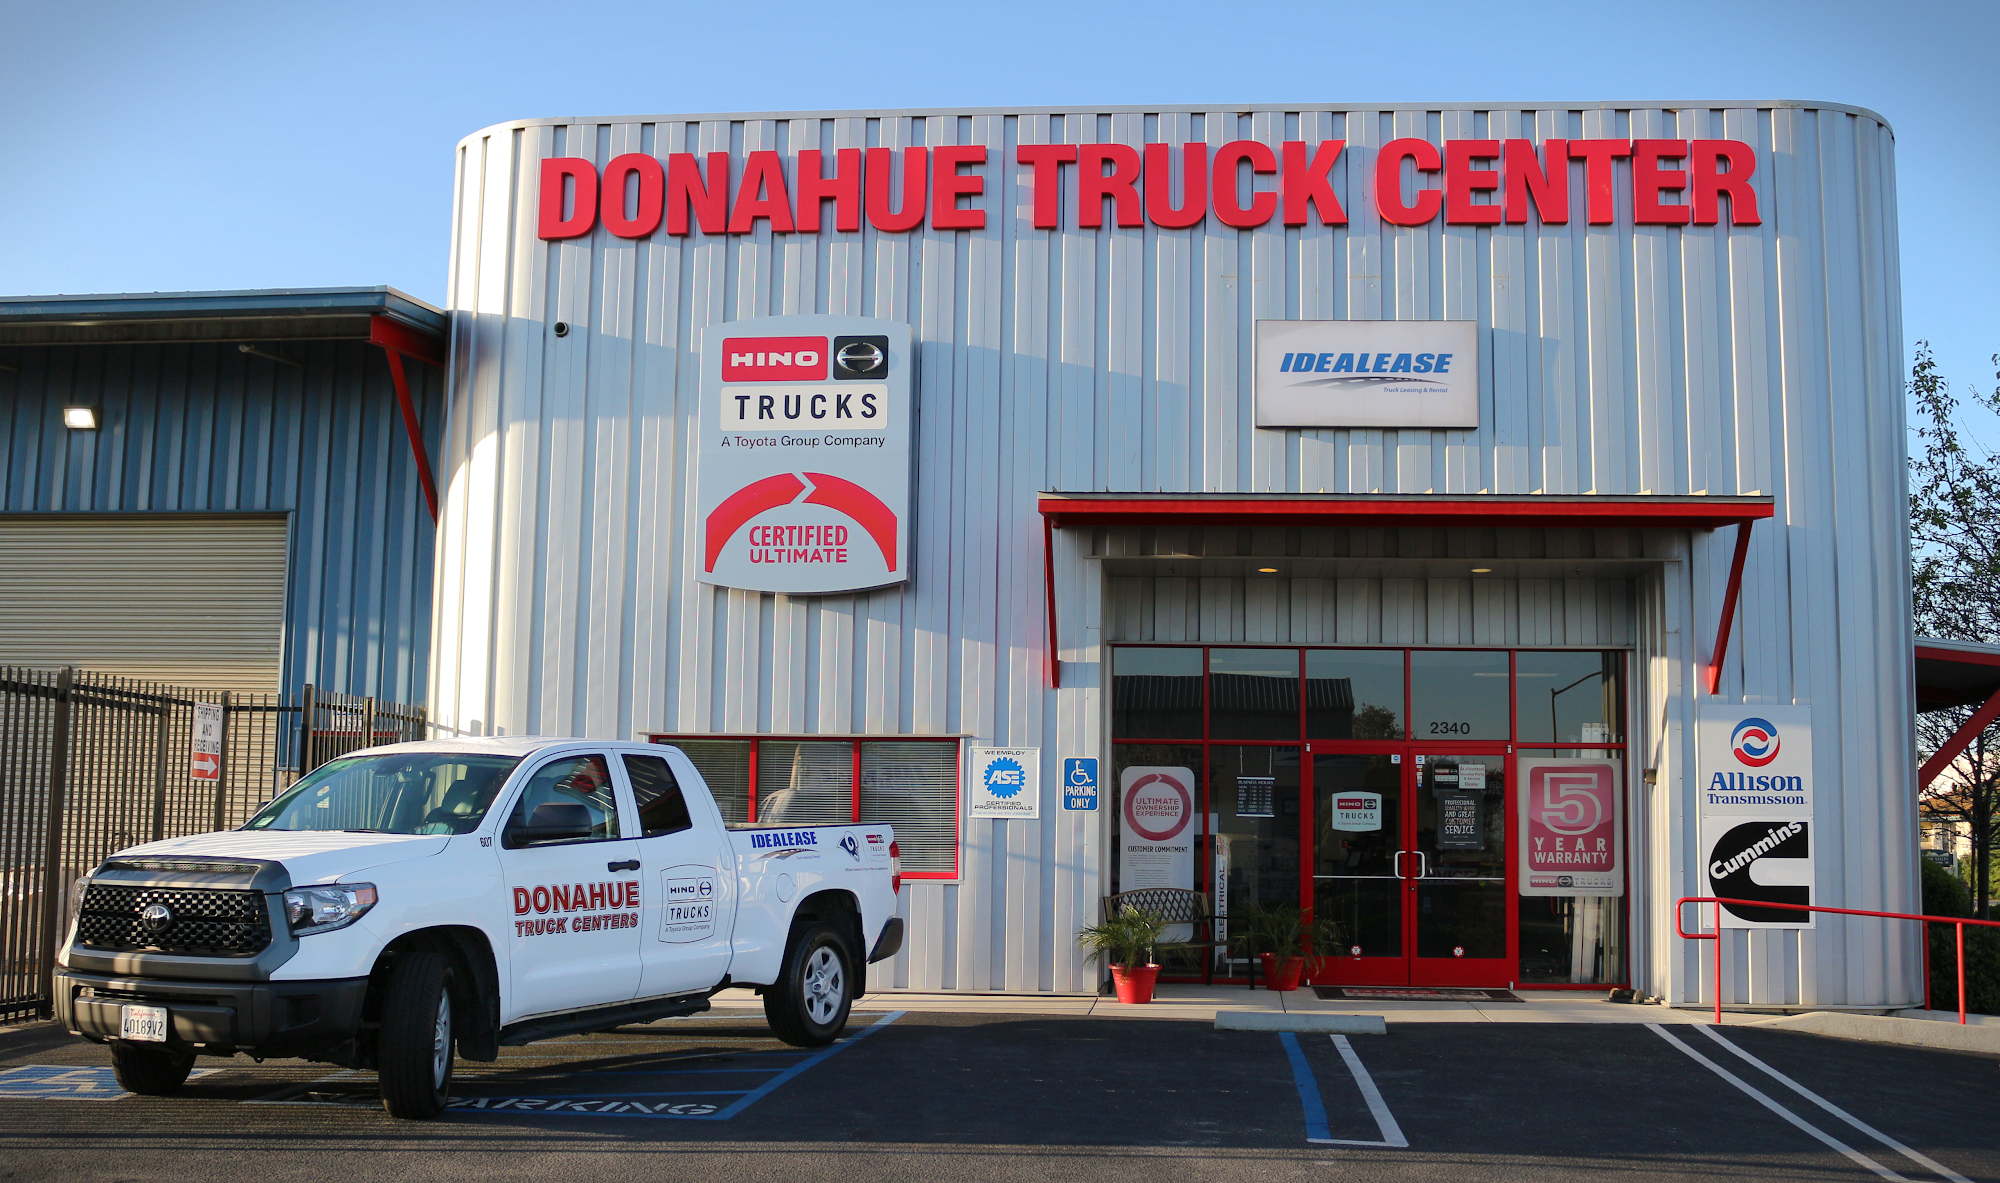 Donahue Truck Centers & Donahue Idealease